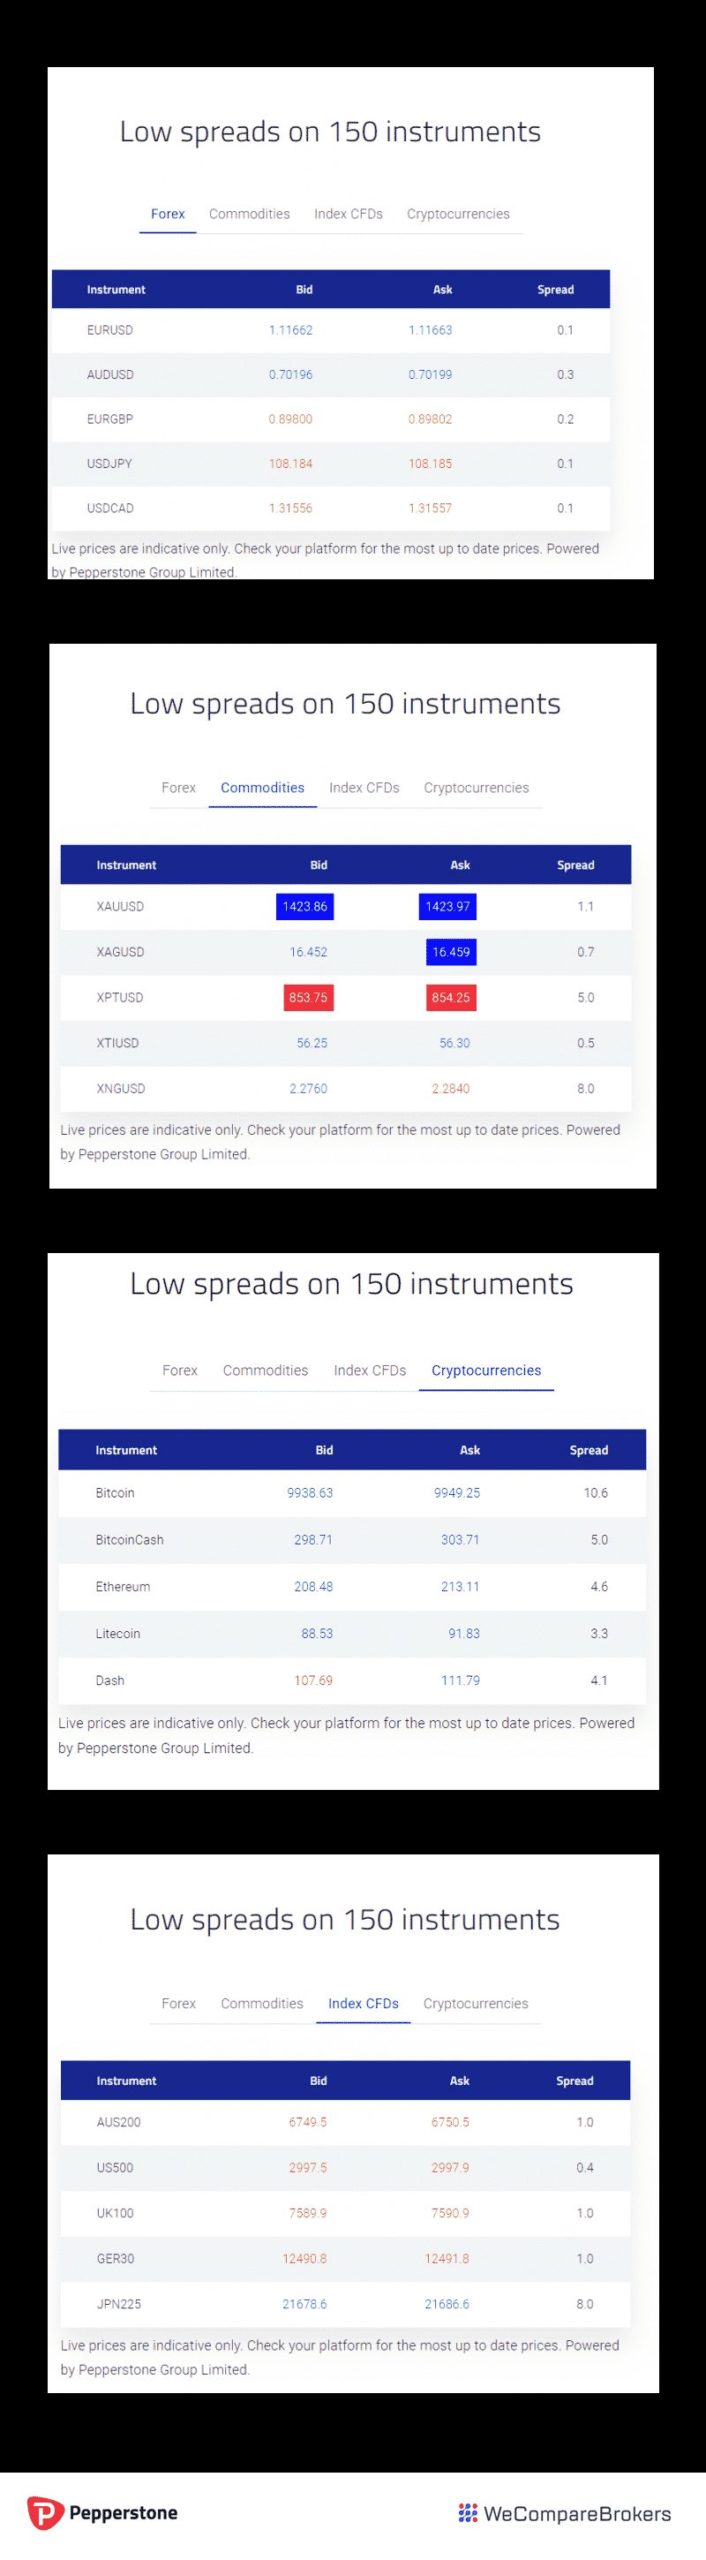 Tables showing low spreads on different instruments